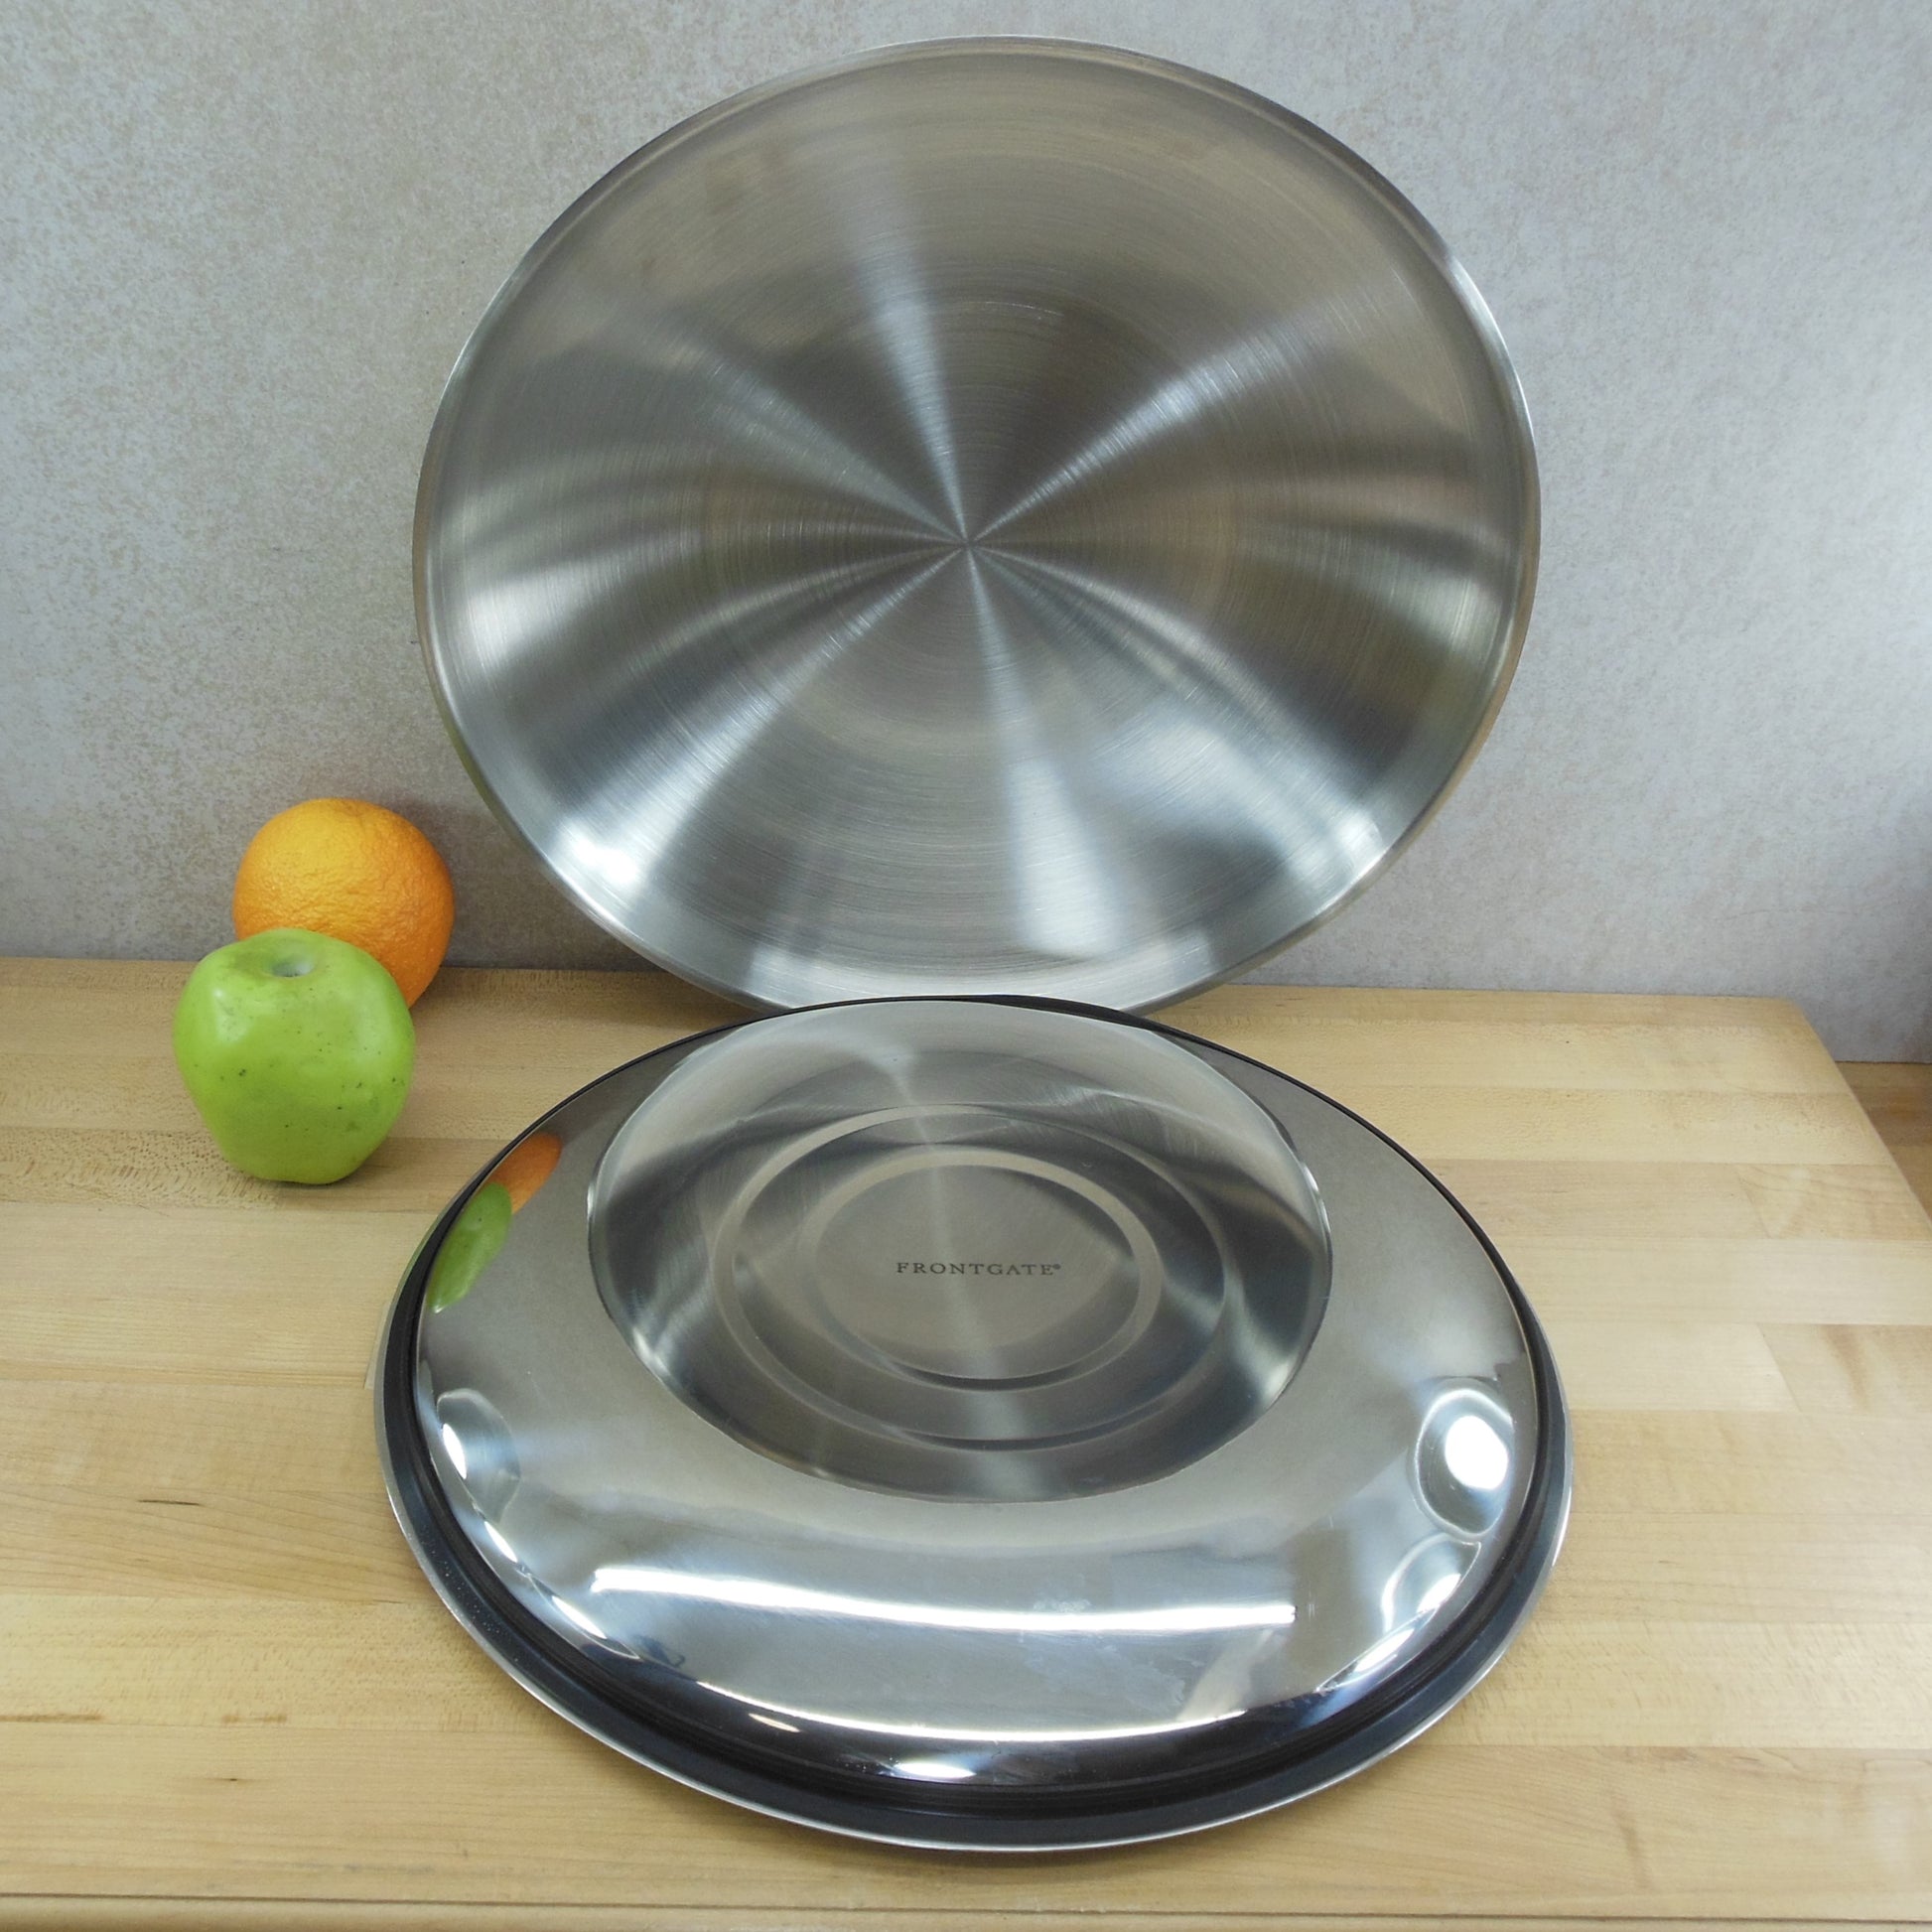 Frontgate Super Chill Stainless Appetizer Serving Tray Shrimp Cocktail Dip 2 Piece